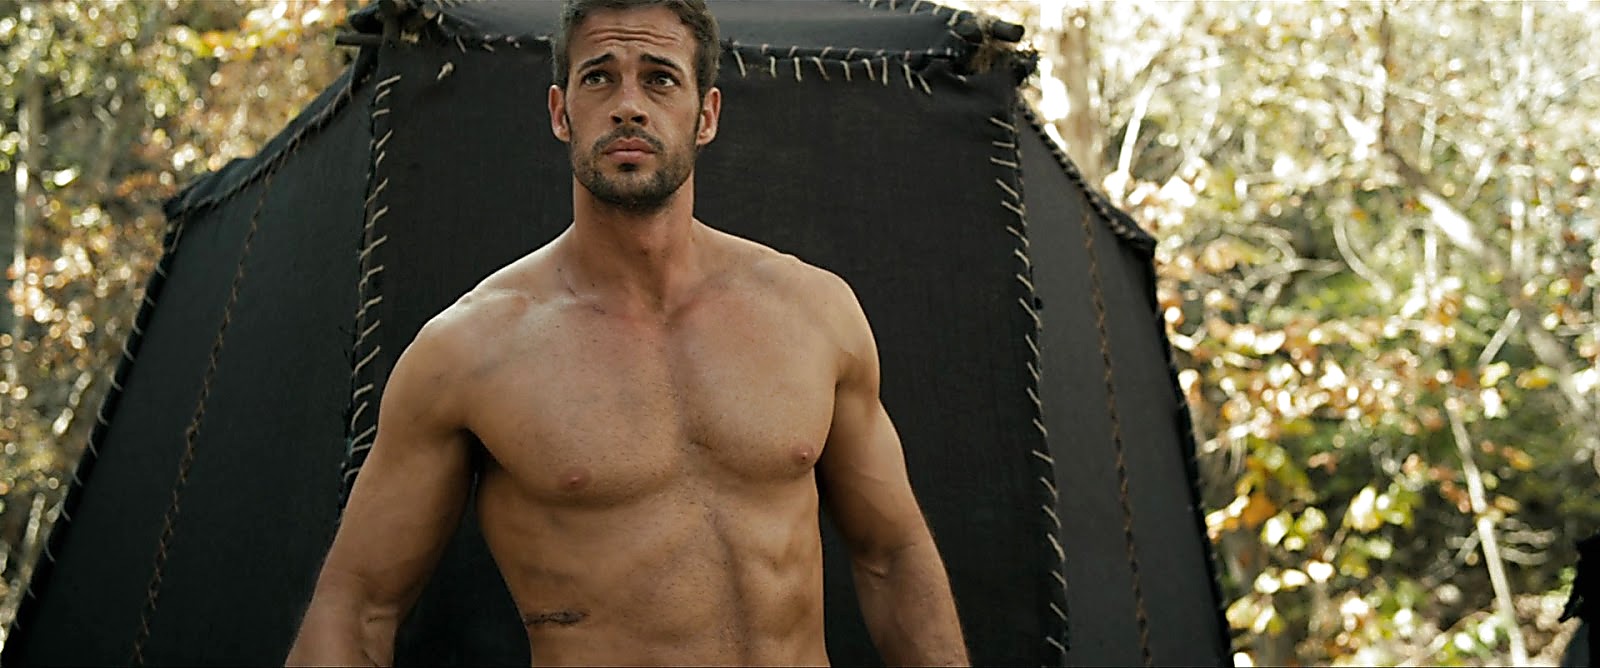 William Levy sexy shirtless scene May 19, 2017, 11am